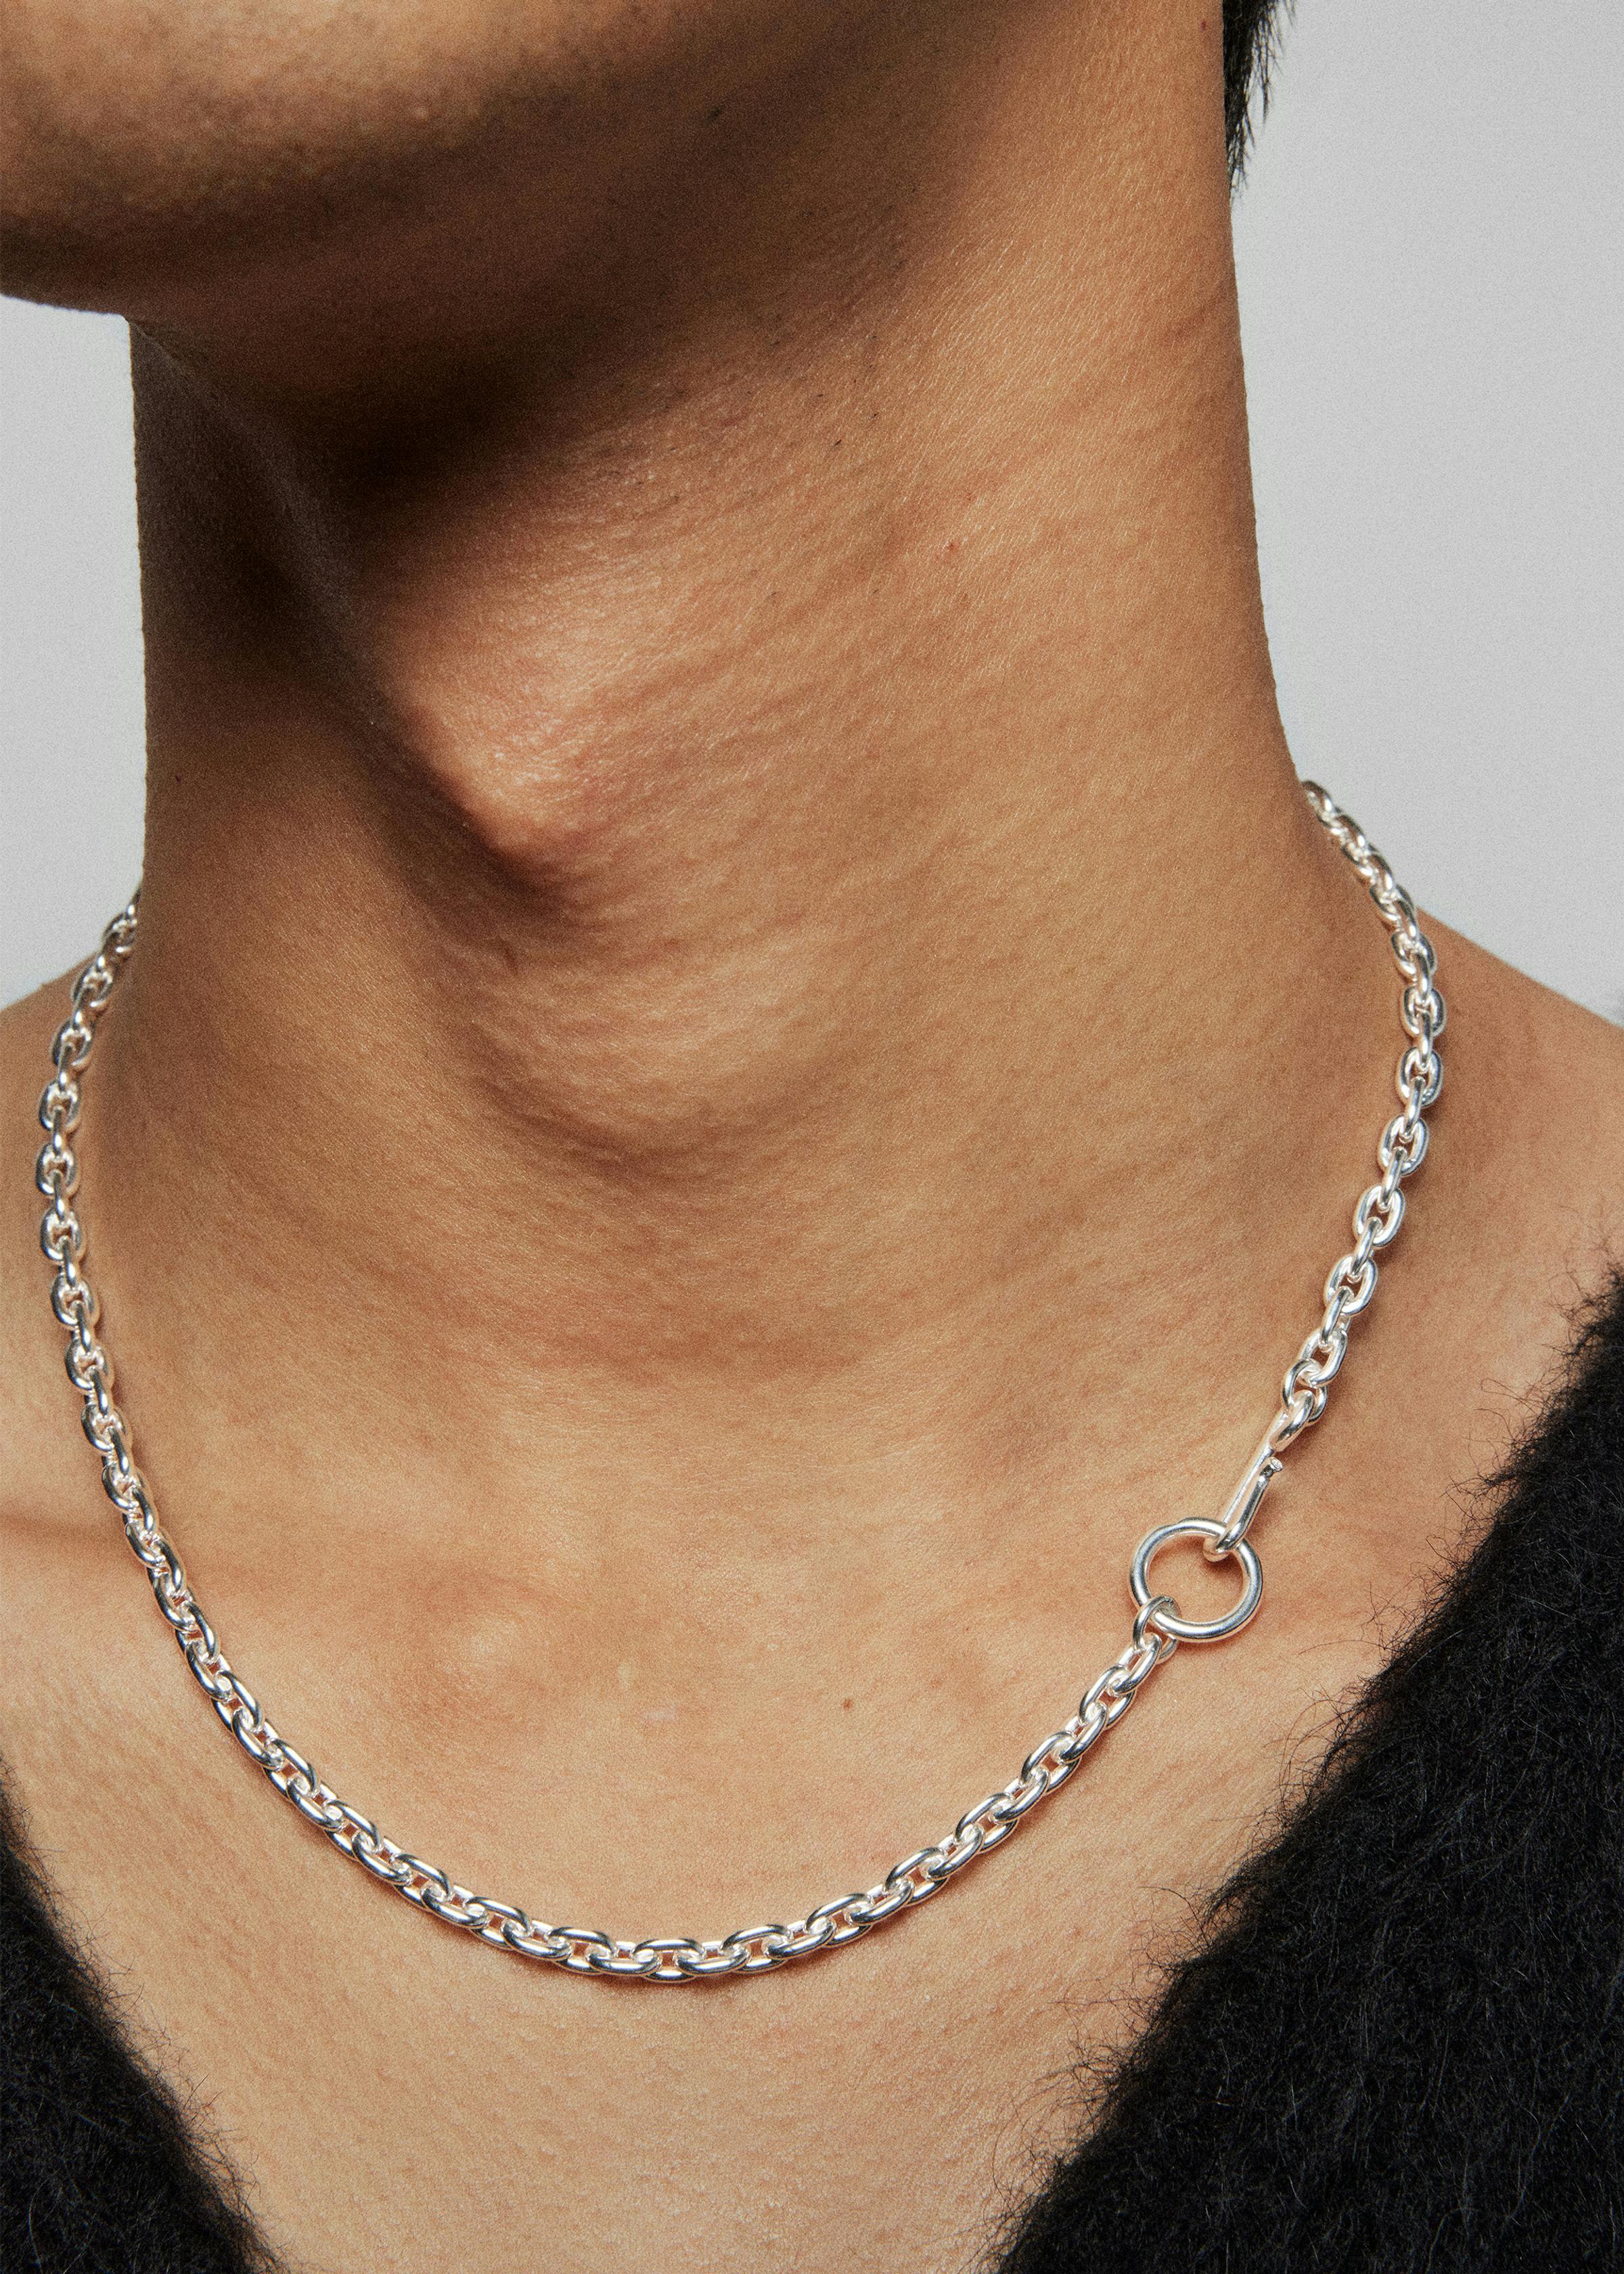 Standard necklace extra thin